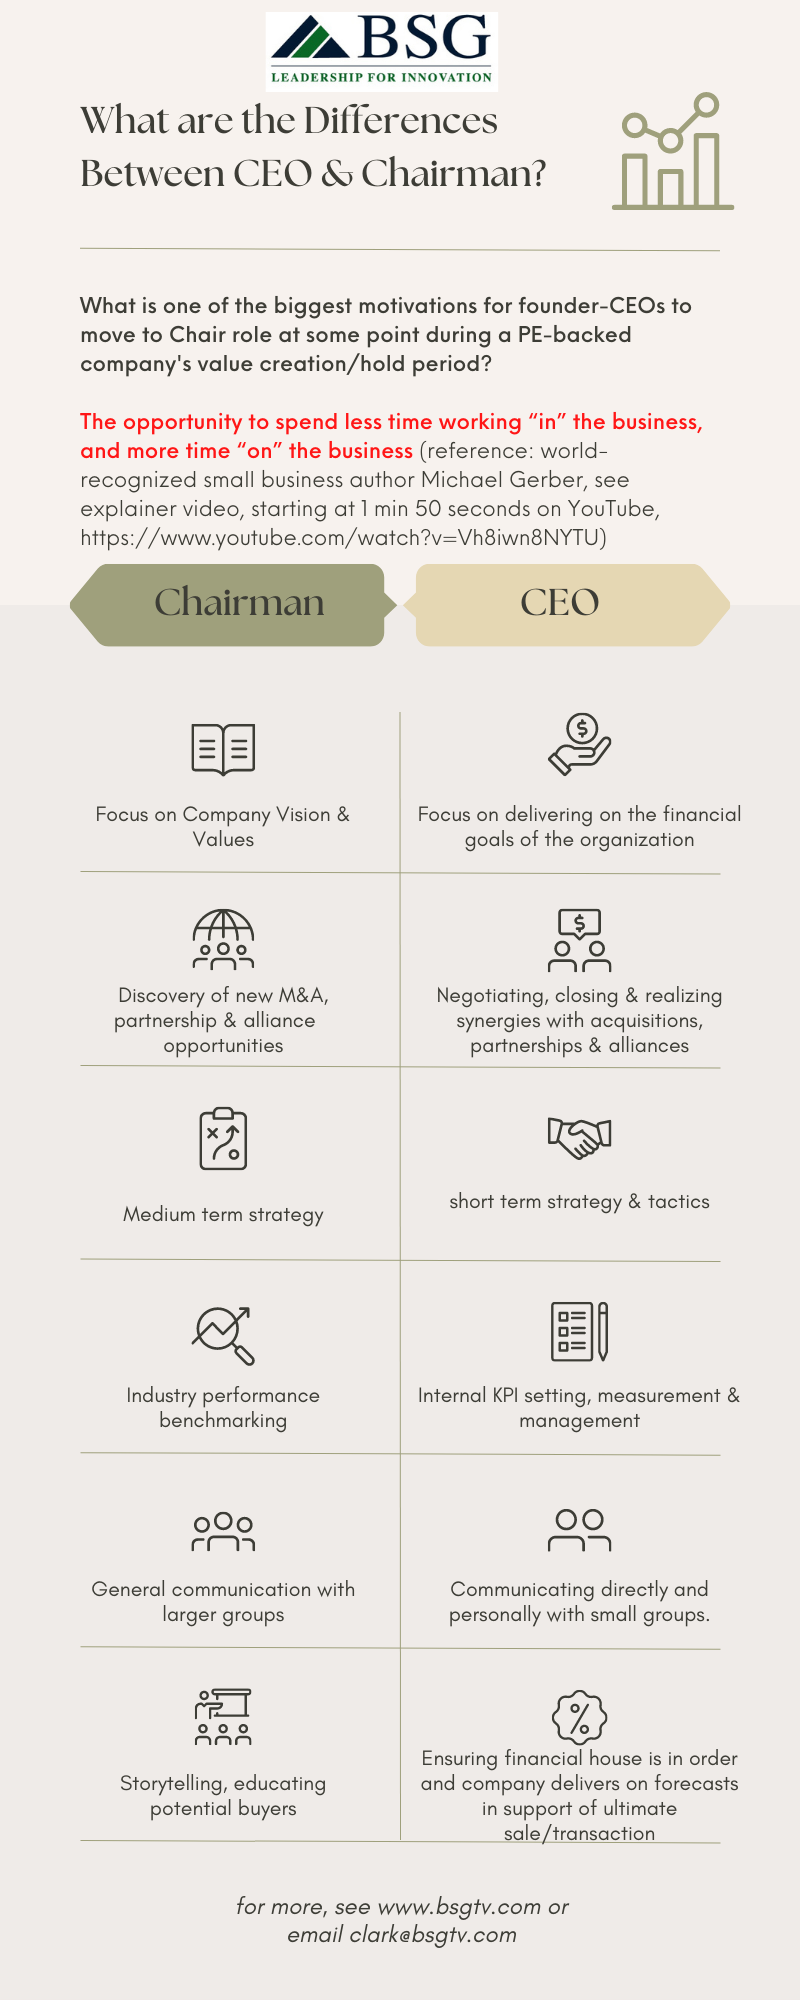 Copy of What are the Differences Between CEO & Chairman